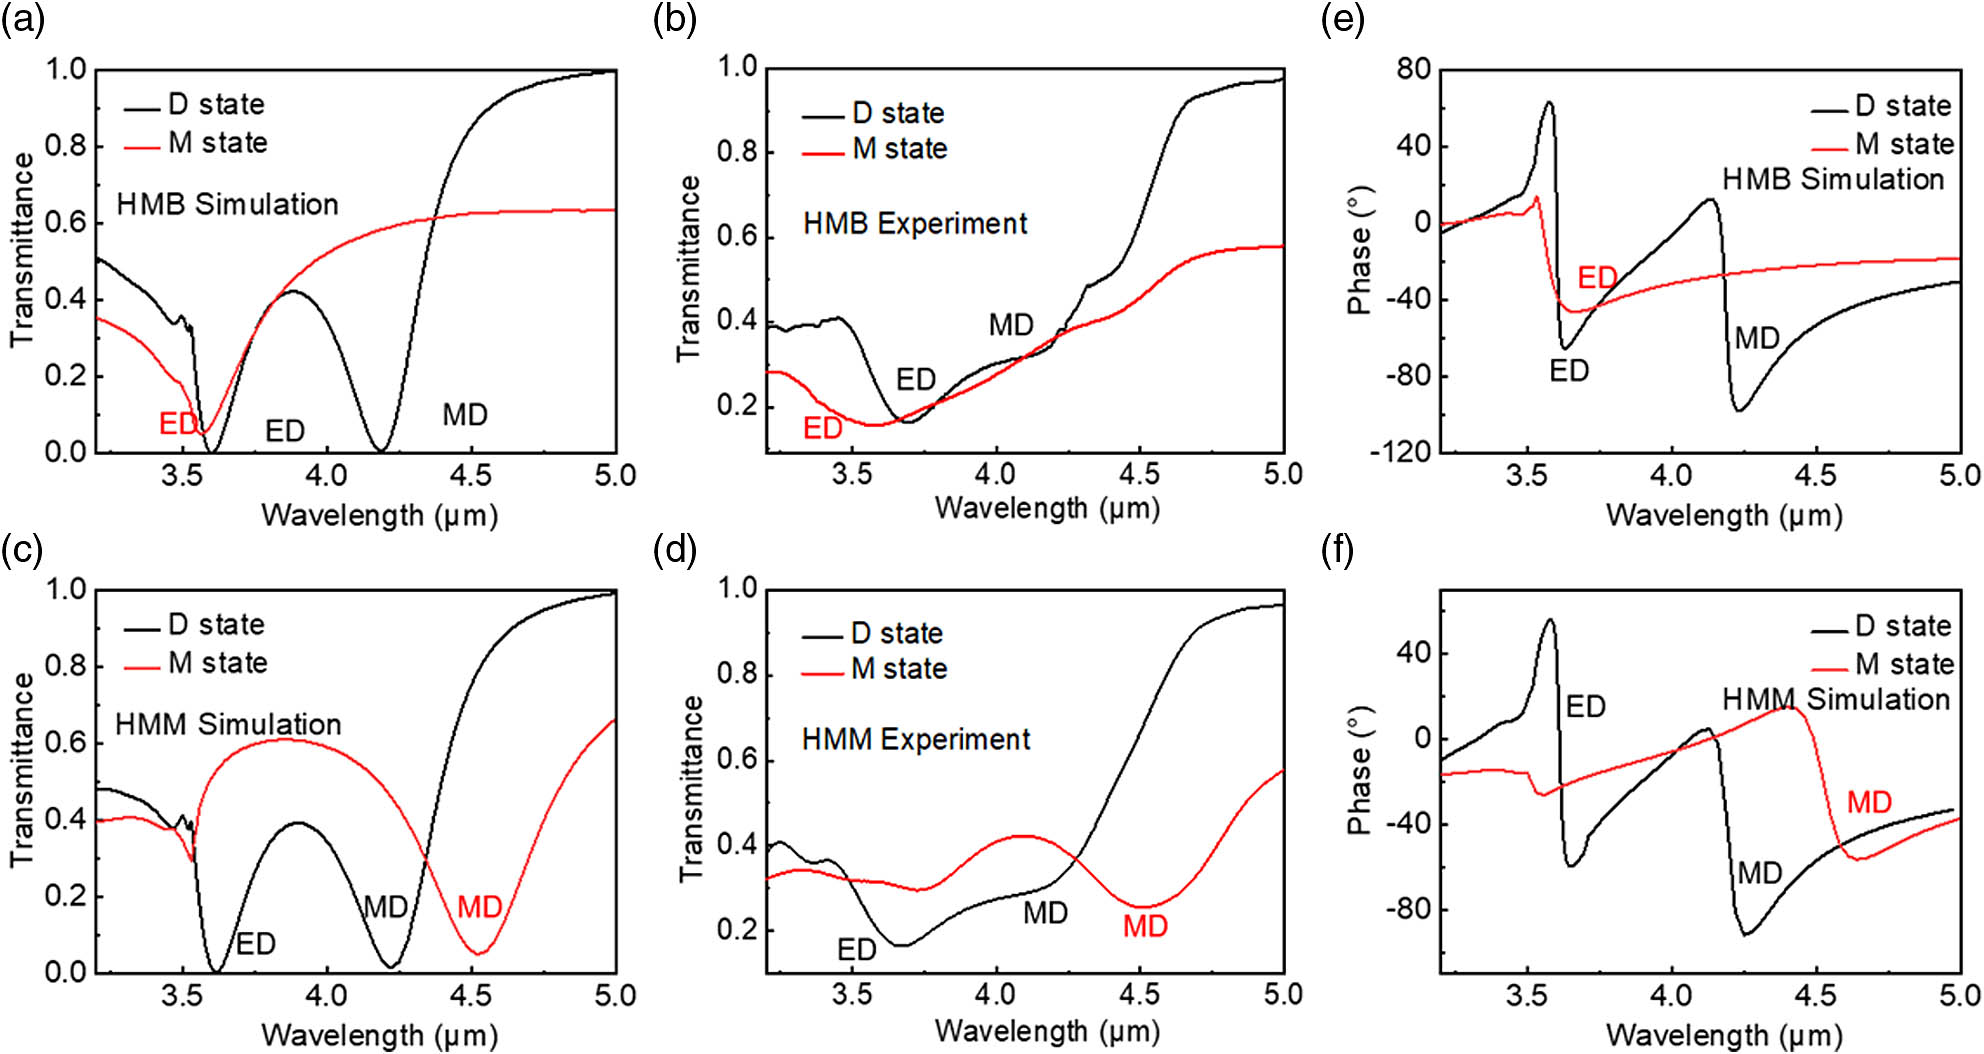 Tunable optical properties of HMB and HMM configurations. (a) Simulated and (b) measured transmittance spectra of the HMB configuration at dielectric and metallic states. (c) Simulated and (d) measured transmittance spectra of HMM configuration at dielectric and metallic states. Simulated transmission phase spectra of (e) HMB and (f) HMM configurations at dielectric and metallic states.